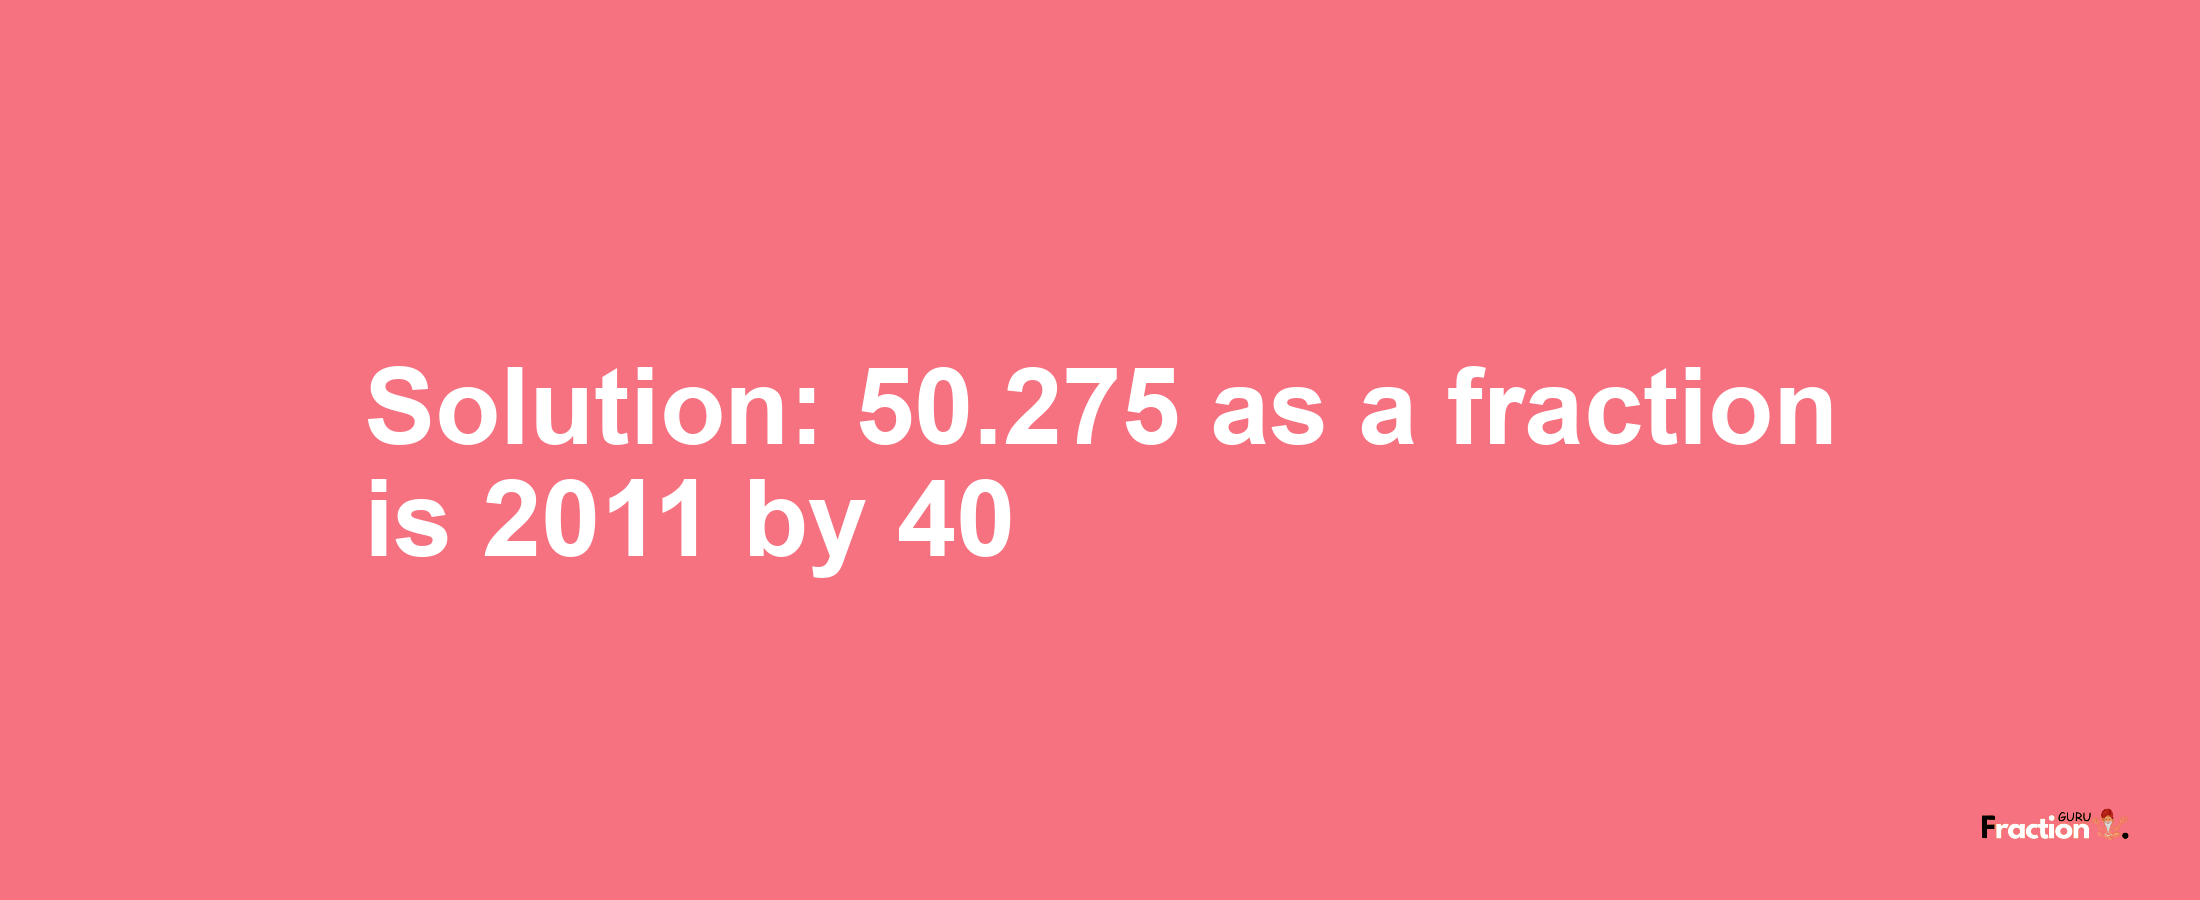 Solution:50.275 as a fraction is 2011/40